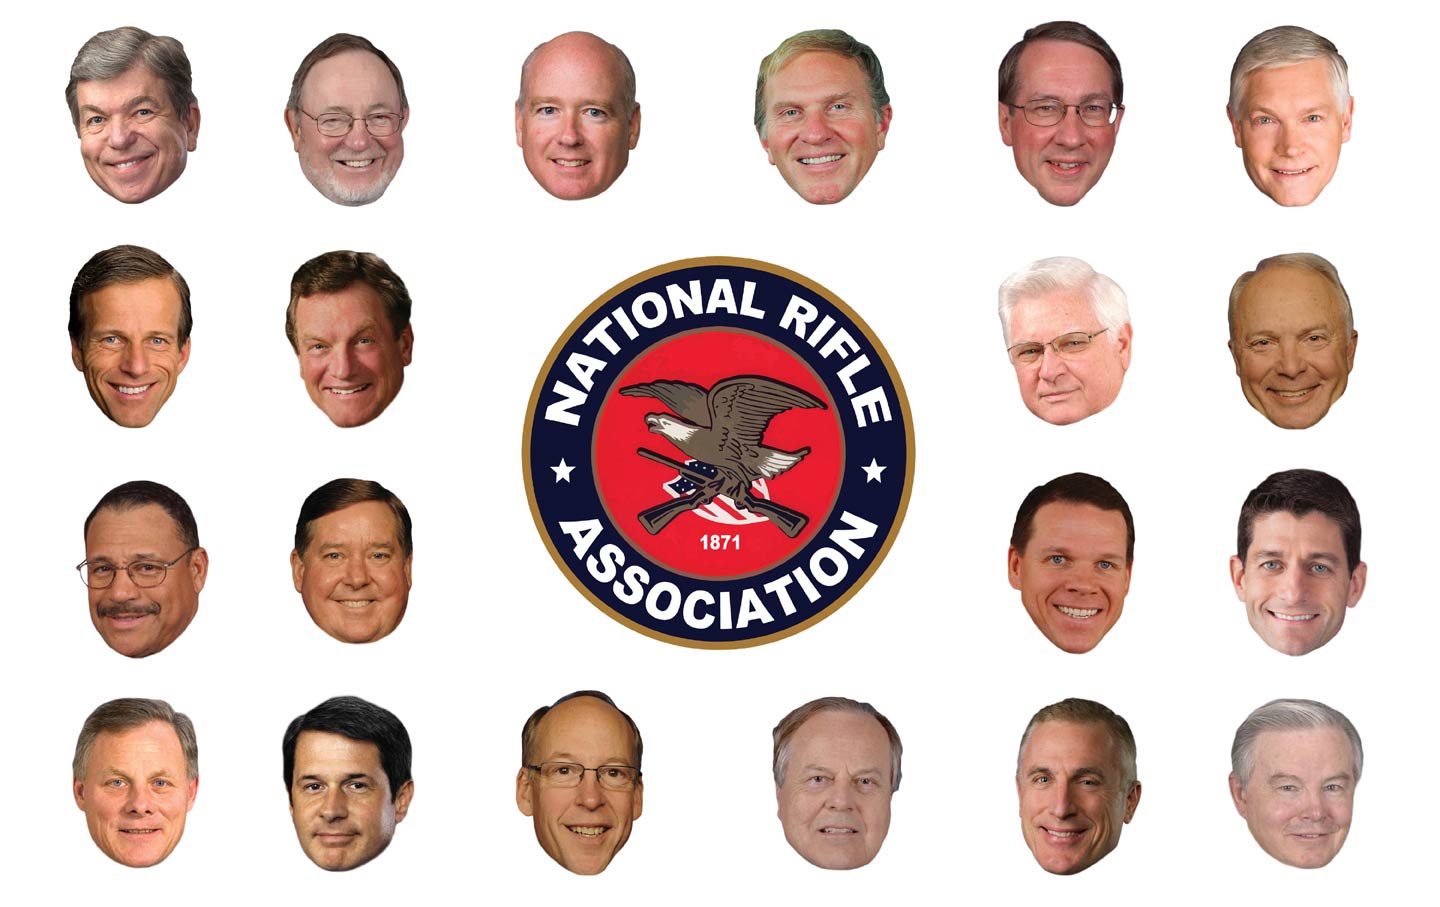 Call the Top 20 Recipients of NRA Cash in Congress